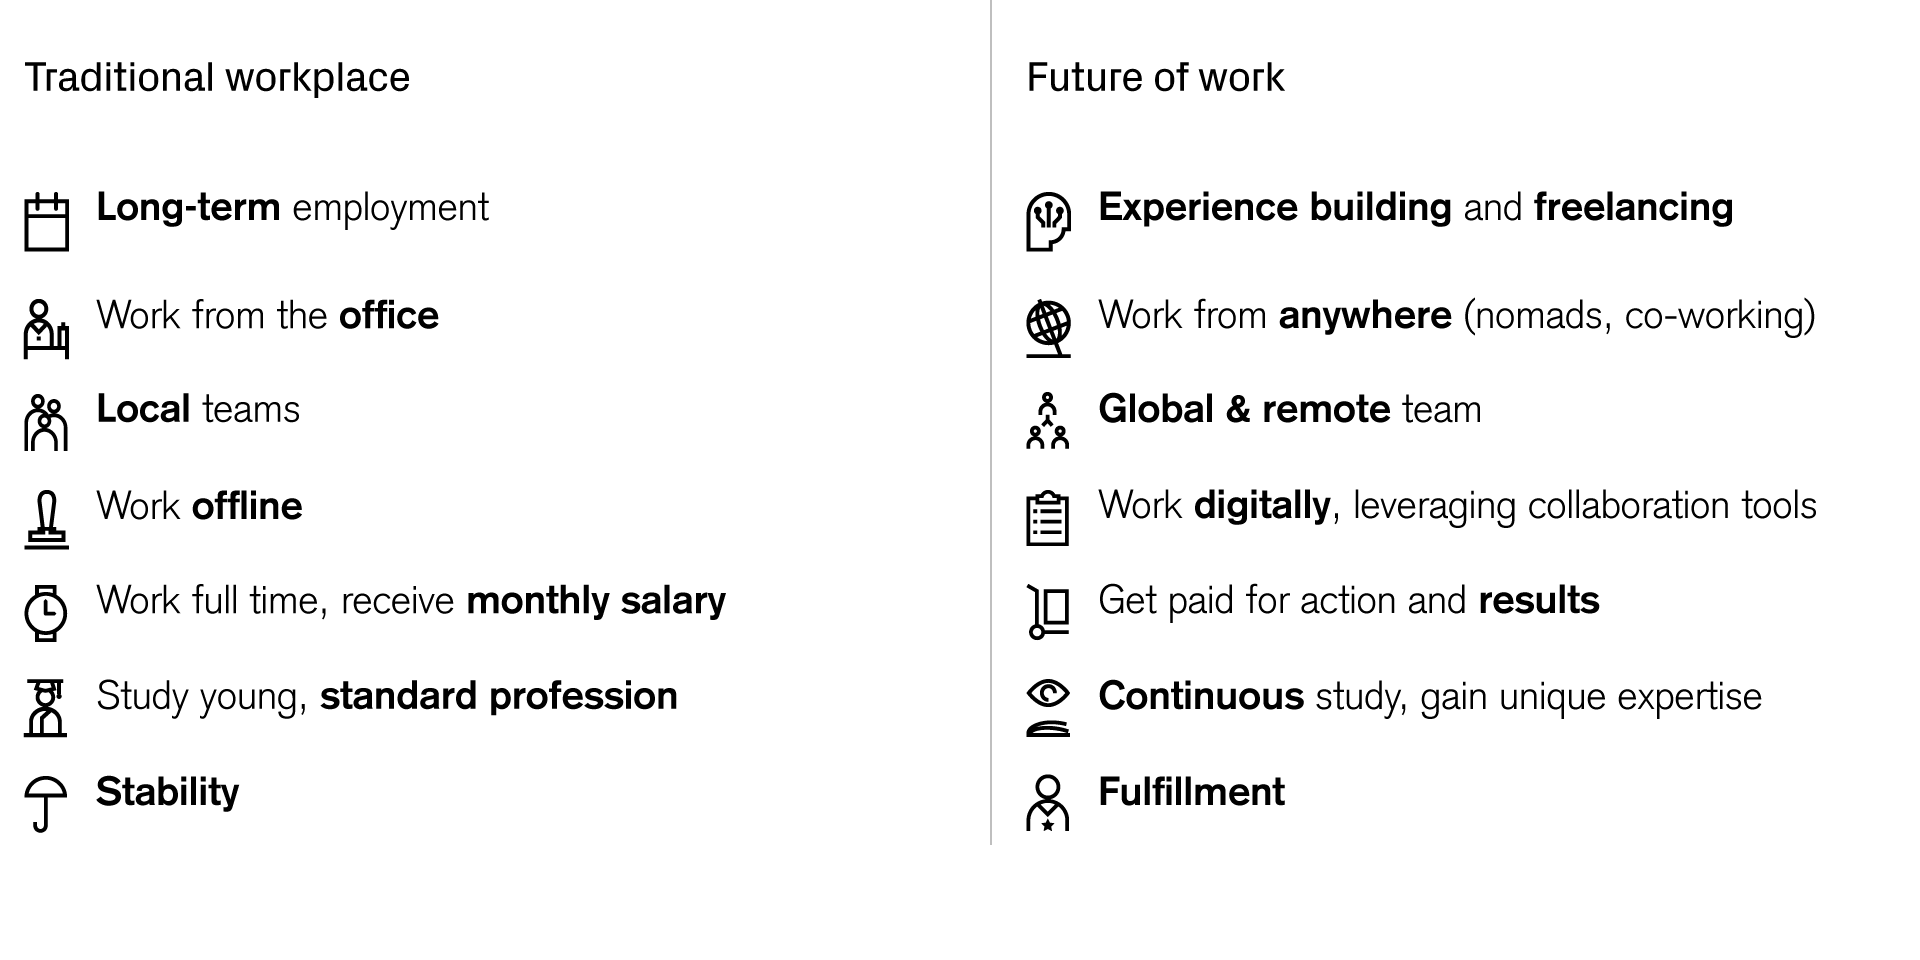 Column 1 Traditional workplace: long term employment, work from the office, local teams, work offline, work full time receives monthly salary, study young, standard profession, stability. Column 2 Future of work: Experience building and freelancing, work from anywhere (nomads, co-working), global and remote teams, work digitally, leveraging collaboration tools, get for action and results, contiunous study, gain unique expertise, fulfillment.